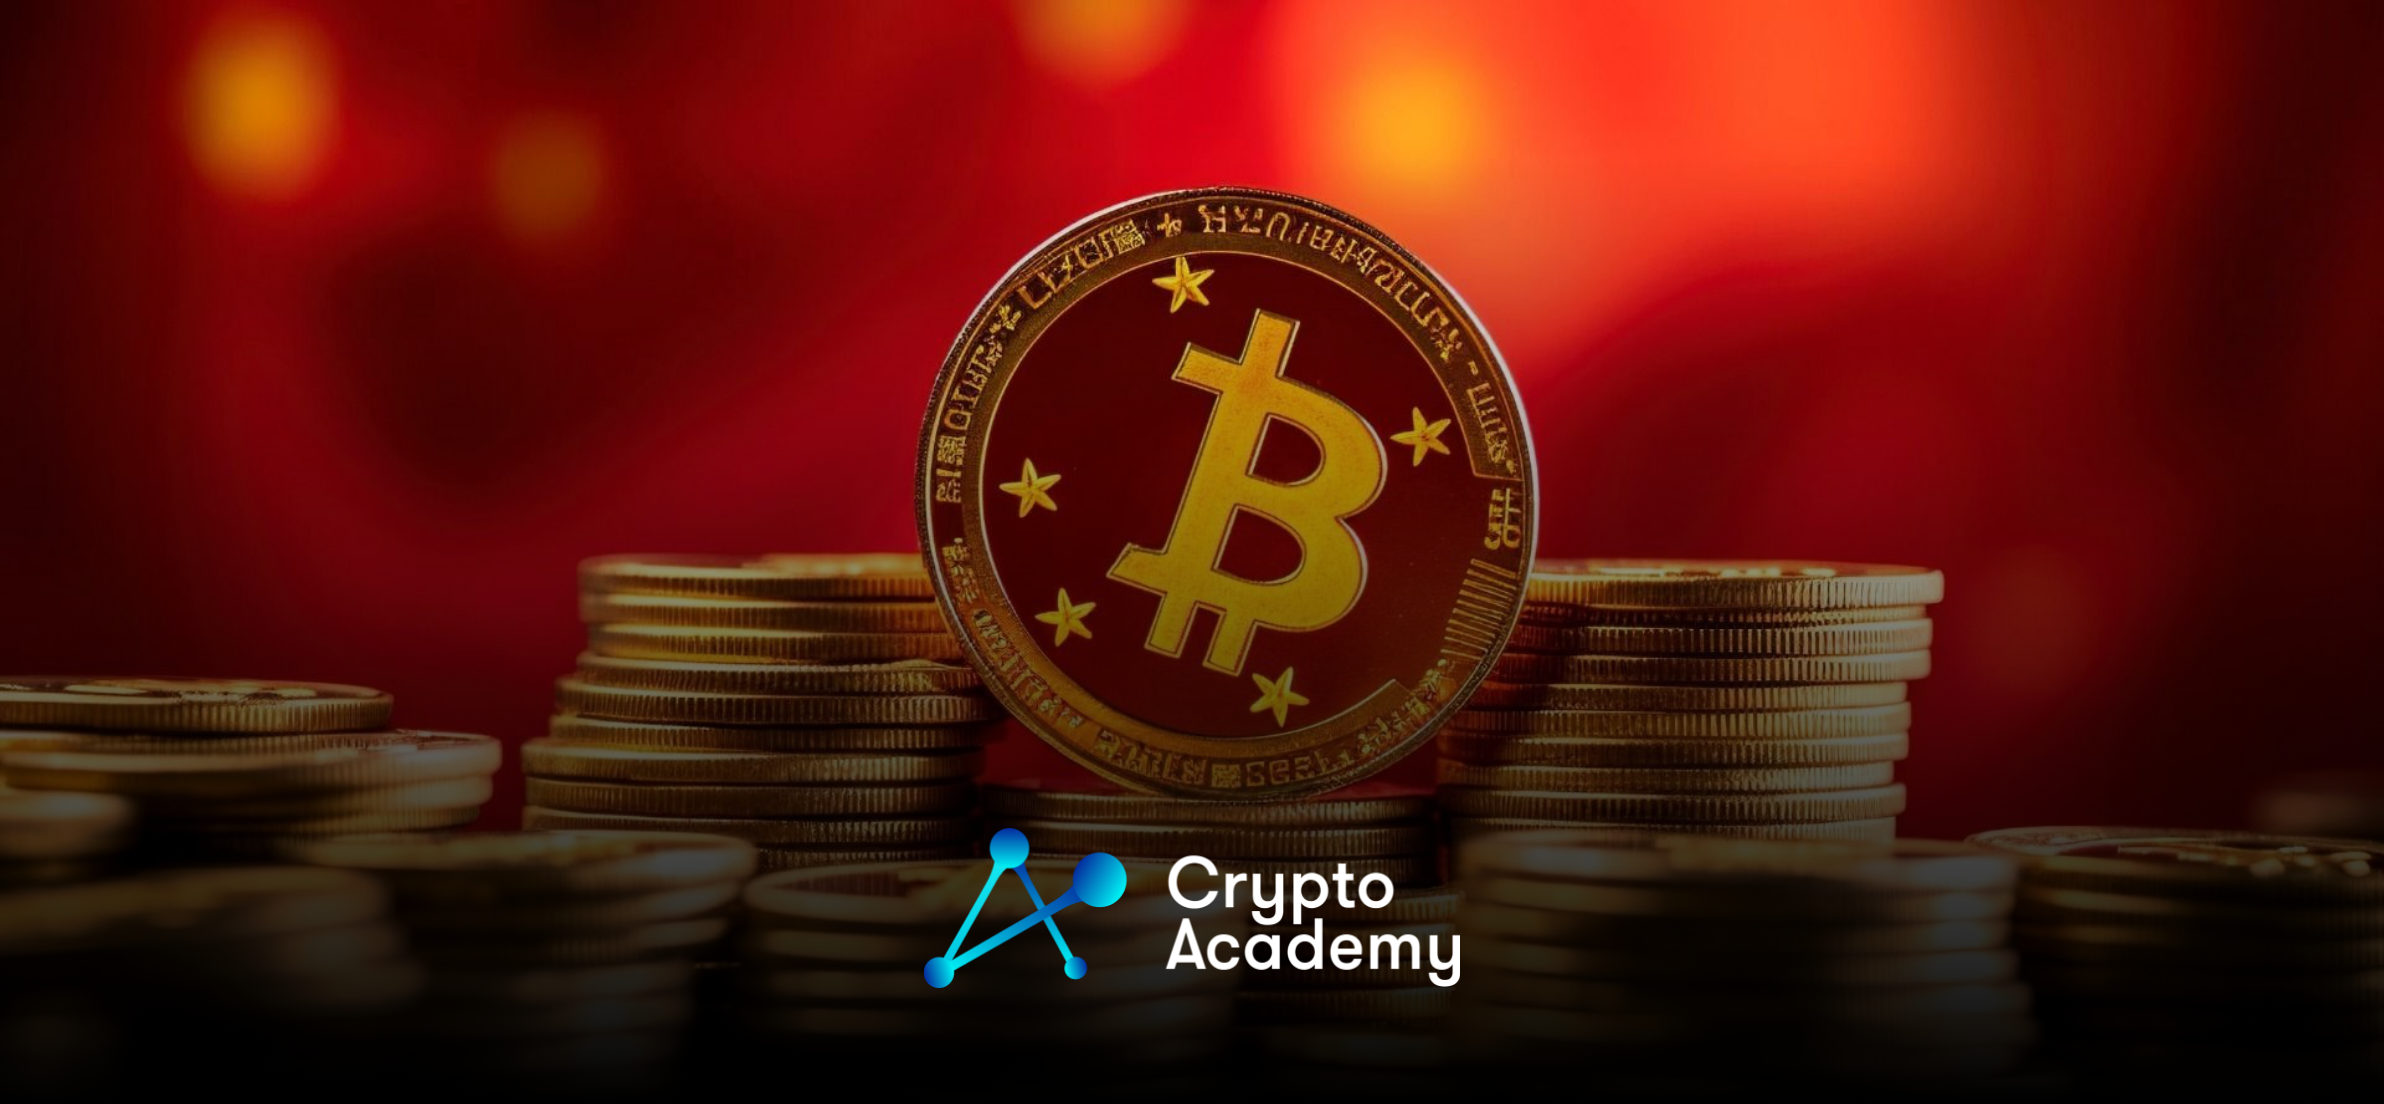 China Officially Recognizes Bitcoin as a Digital Asset